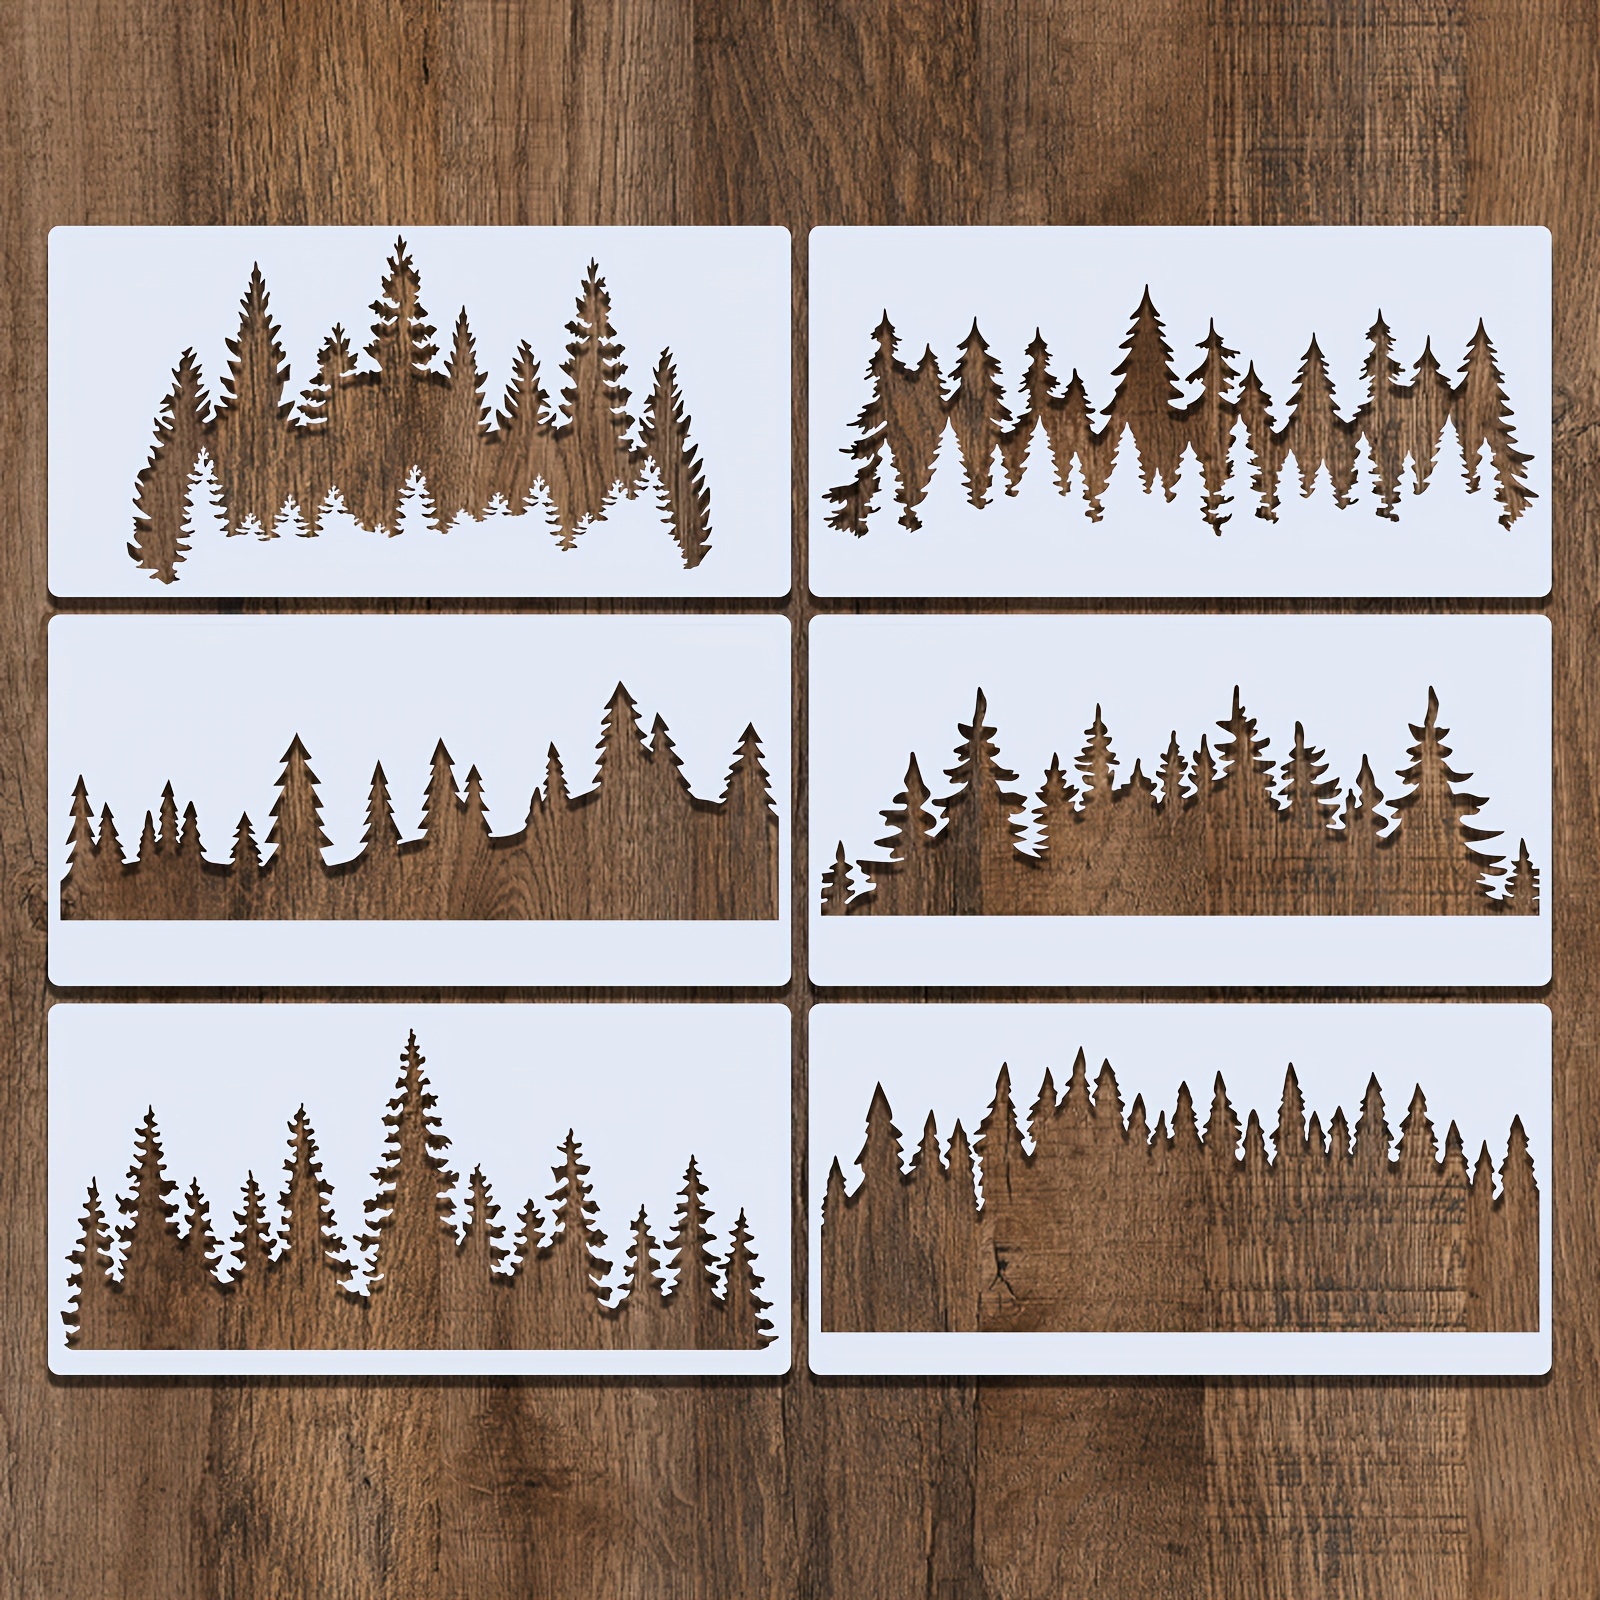 

6-piece Pine Tree Stencils For Diy Projects, 11.8x5.9" Reusable Templates For Wood Burning, Painting On Walls & Fabric